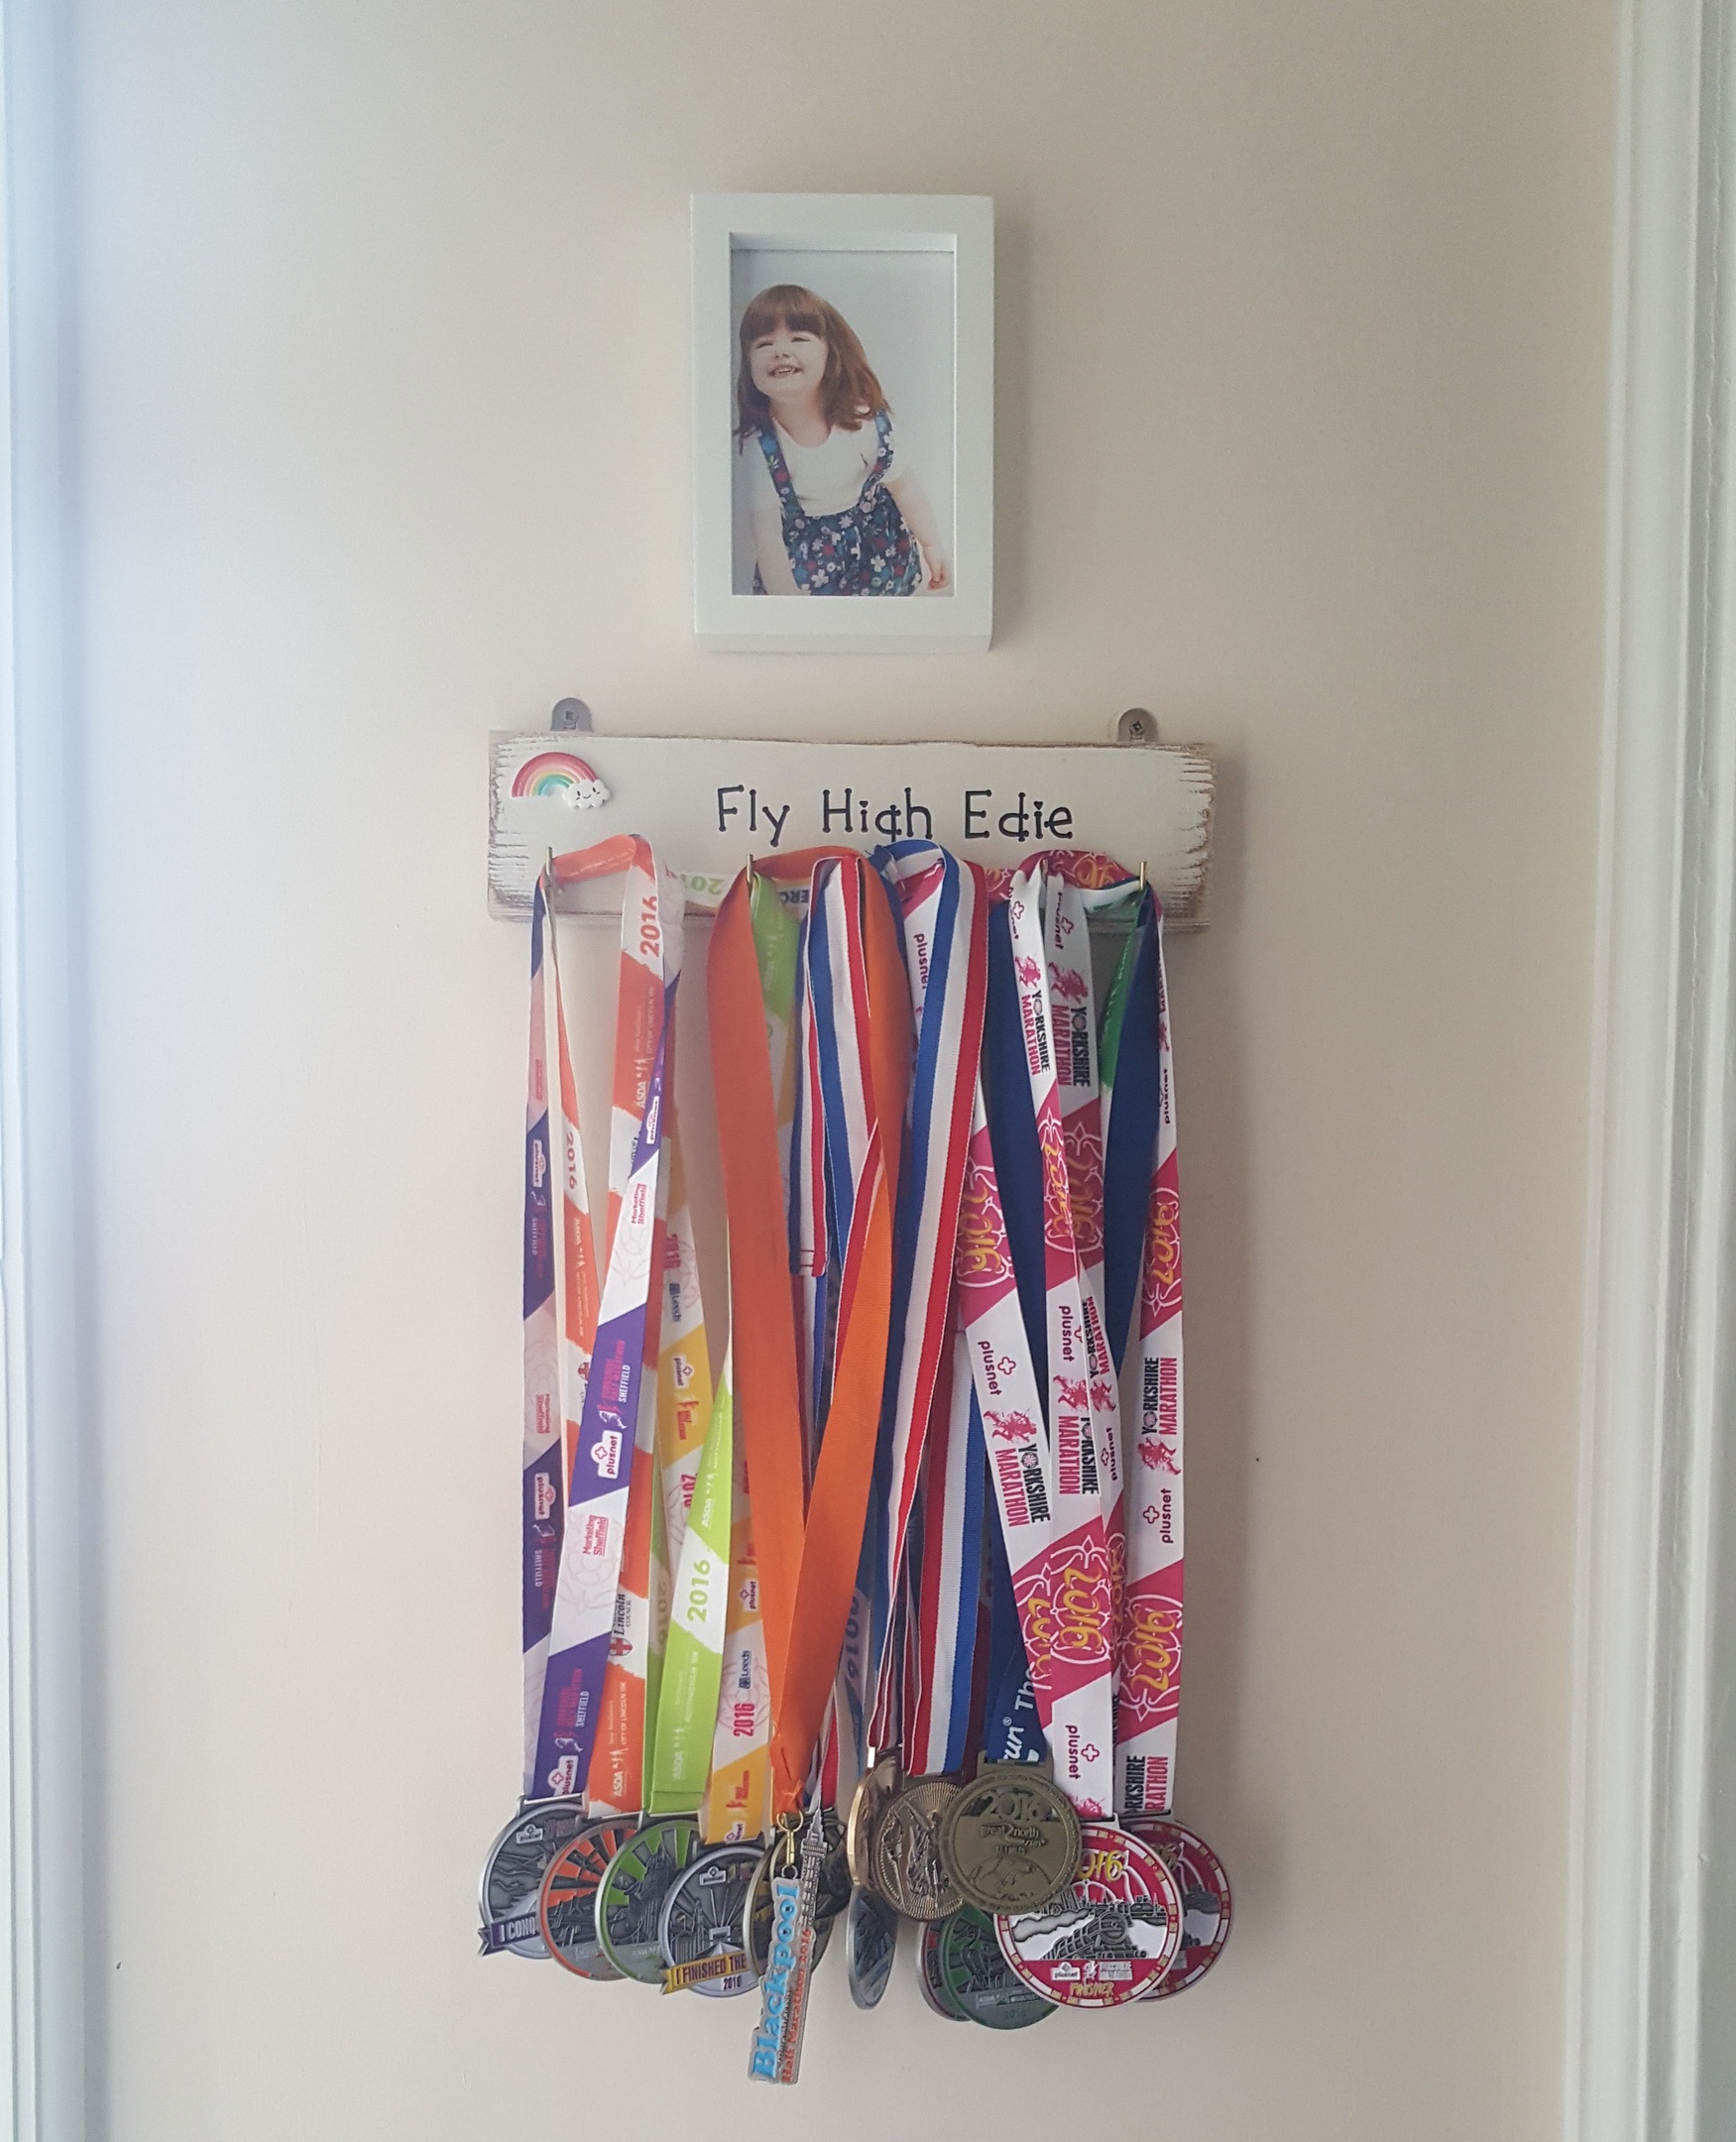 Tom and Cheryl's impressive clutch of medals dedicated to Edie